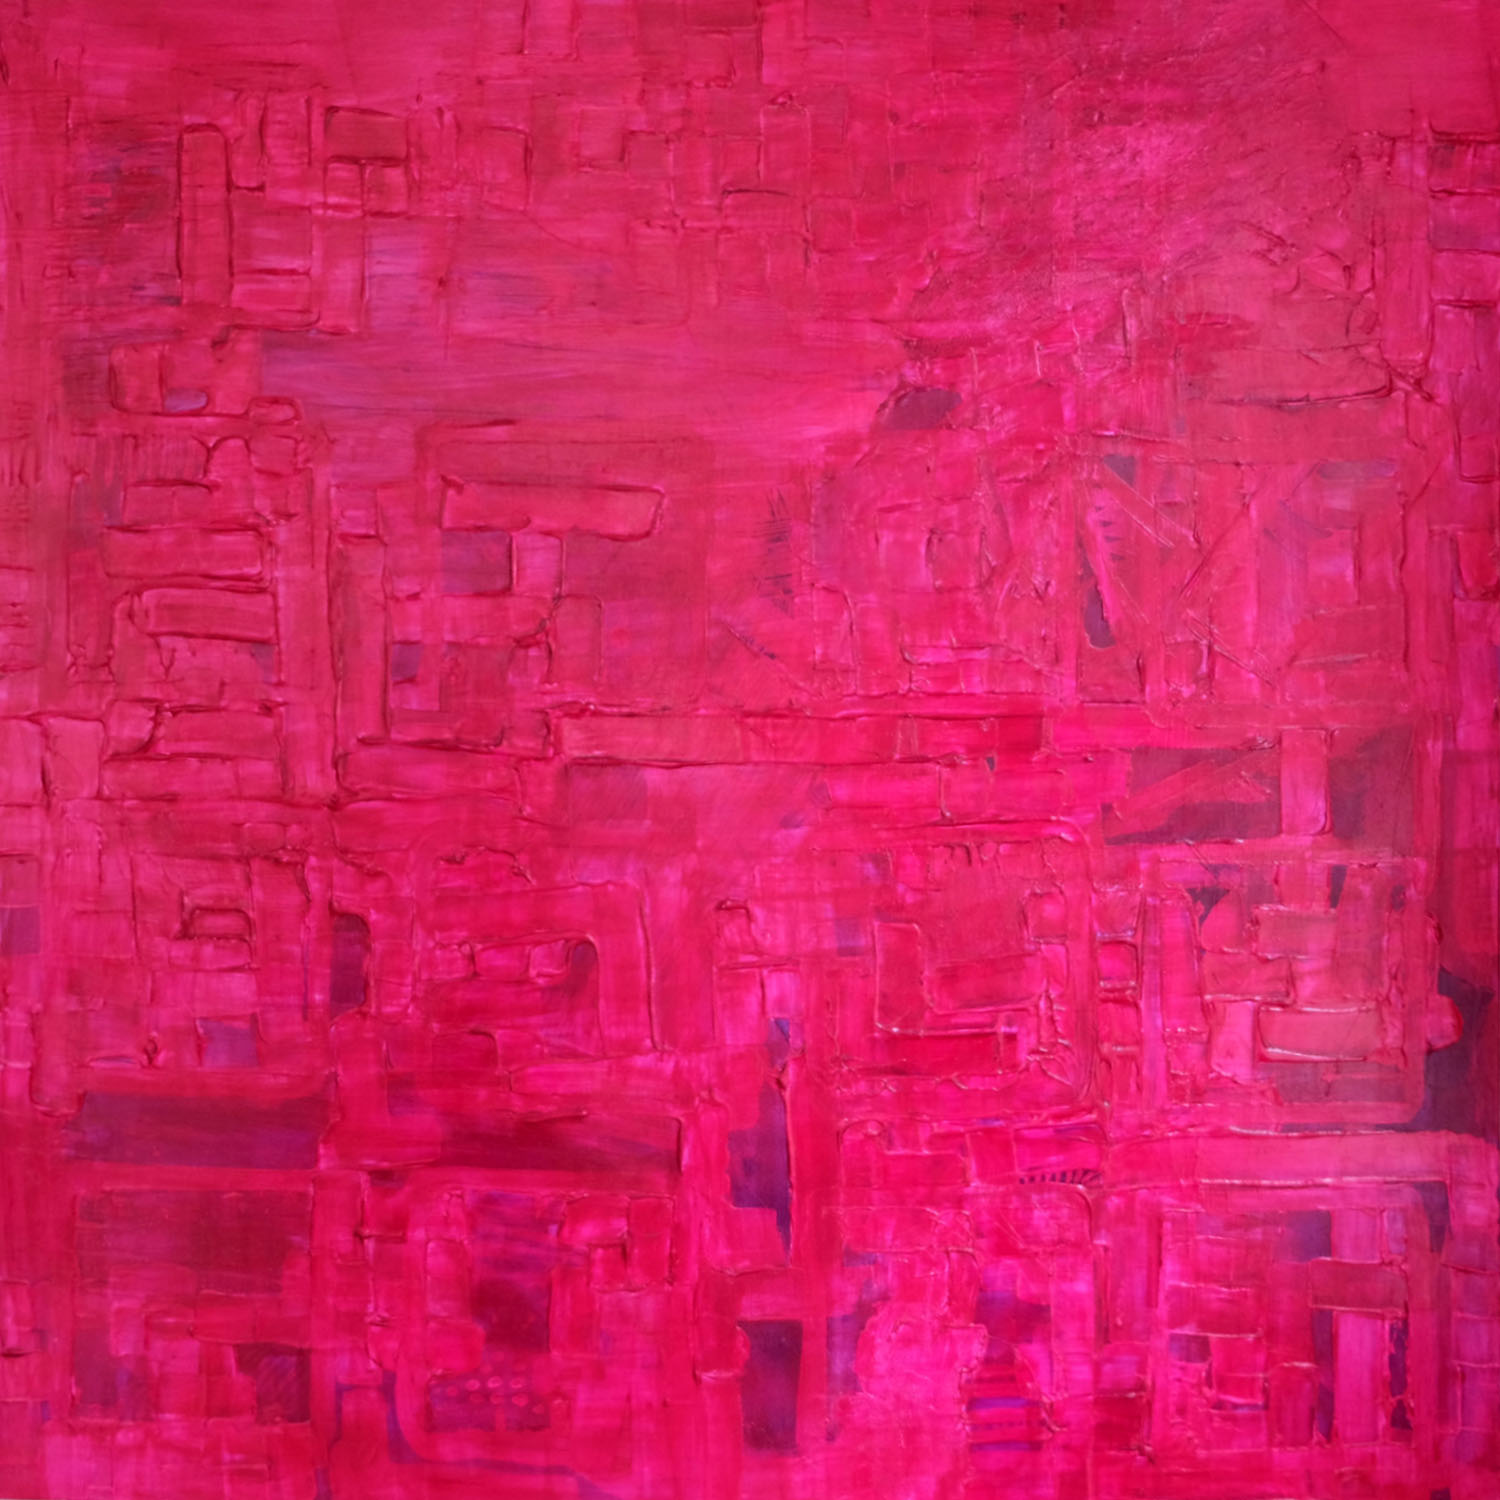 Blame It on my ADD is a 4 foot by 4 foot pink abstract painting by Caitlin Wheeler Art